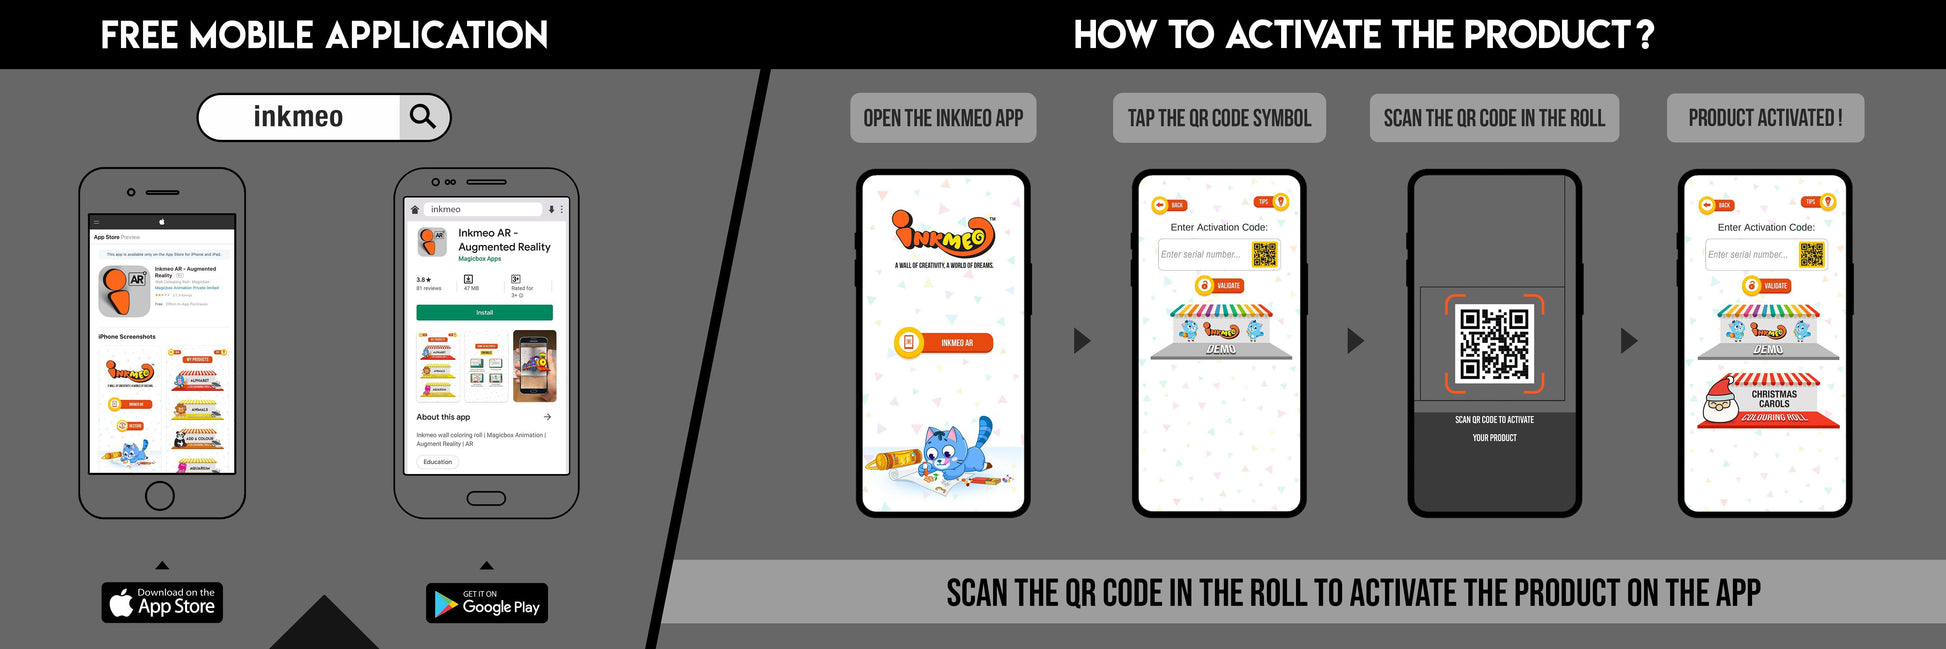 The image features a black background split into two sections. The first showcases a free mobile app to download Inkmeo from the App Store and Google Store. The second displays four phones with the text "To access the Inkmeo app, tap the QR code icon, scan the QR code on the package, and activate the product."